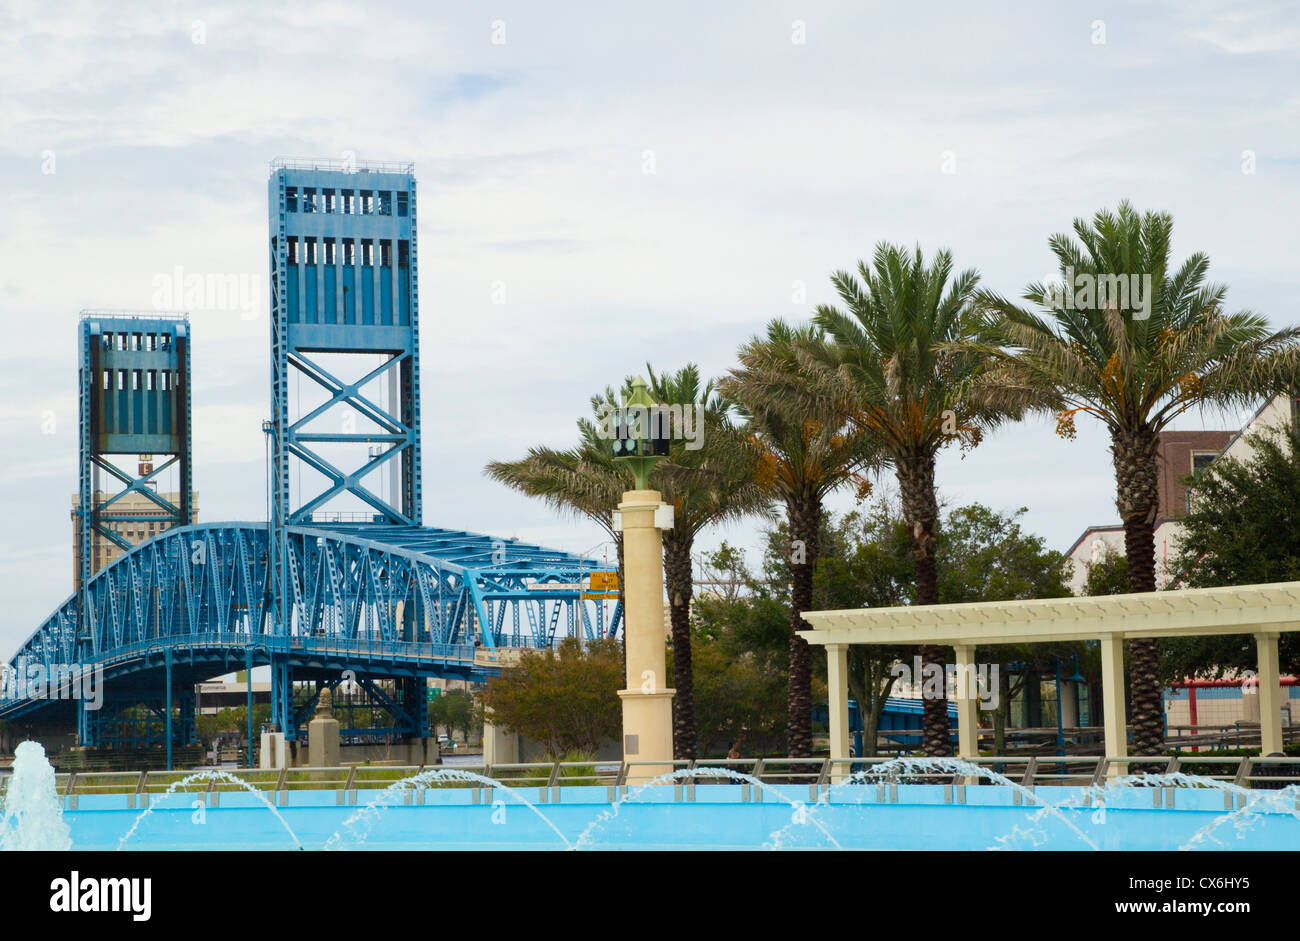 Jacksonville, FL bridge surrounded by water fountains. Stock Photo